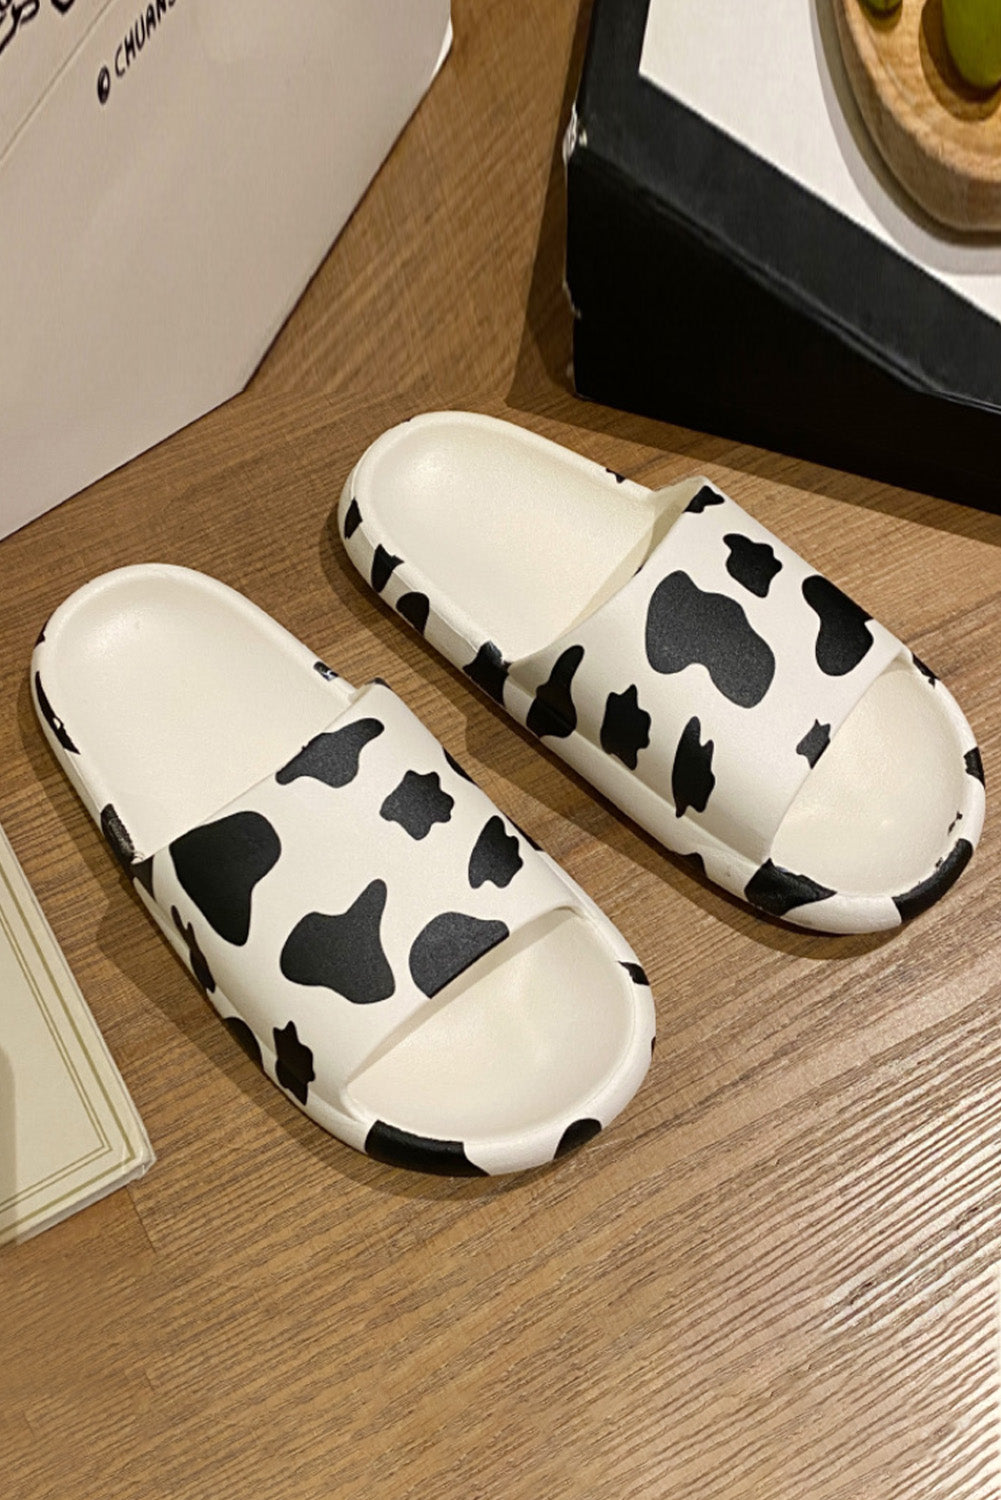 BH02664-1-37, BH02664-1-39, BH02664-1-41, BH02664-1-36, BH02664-1-38, BH02664-1-40, White Summer Cow Print Slides for Women Animal Sandals Open Toe Thick Sole Slippers